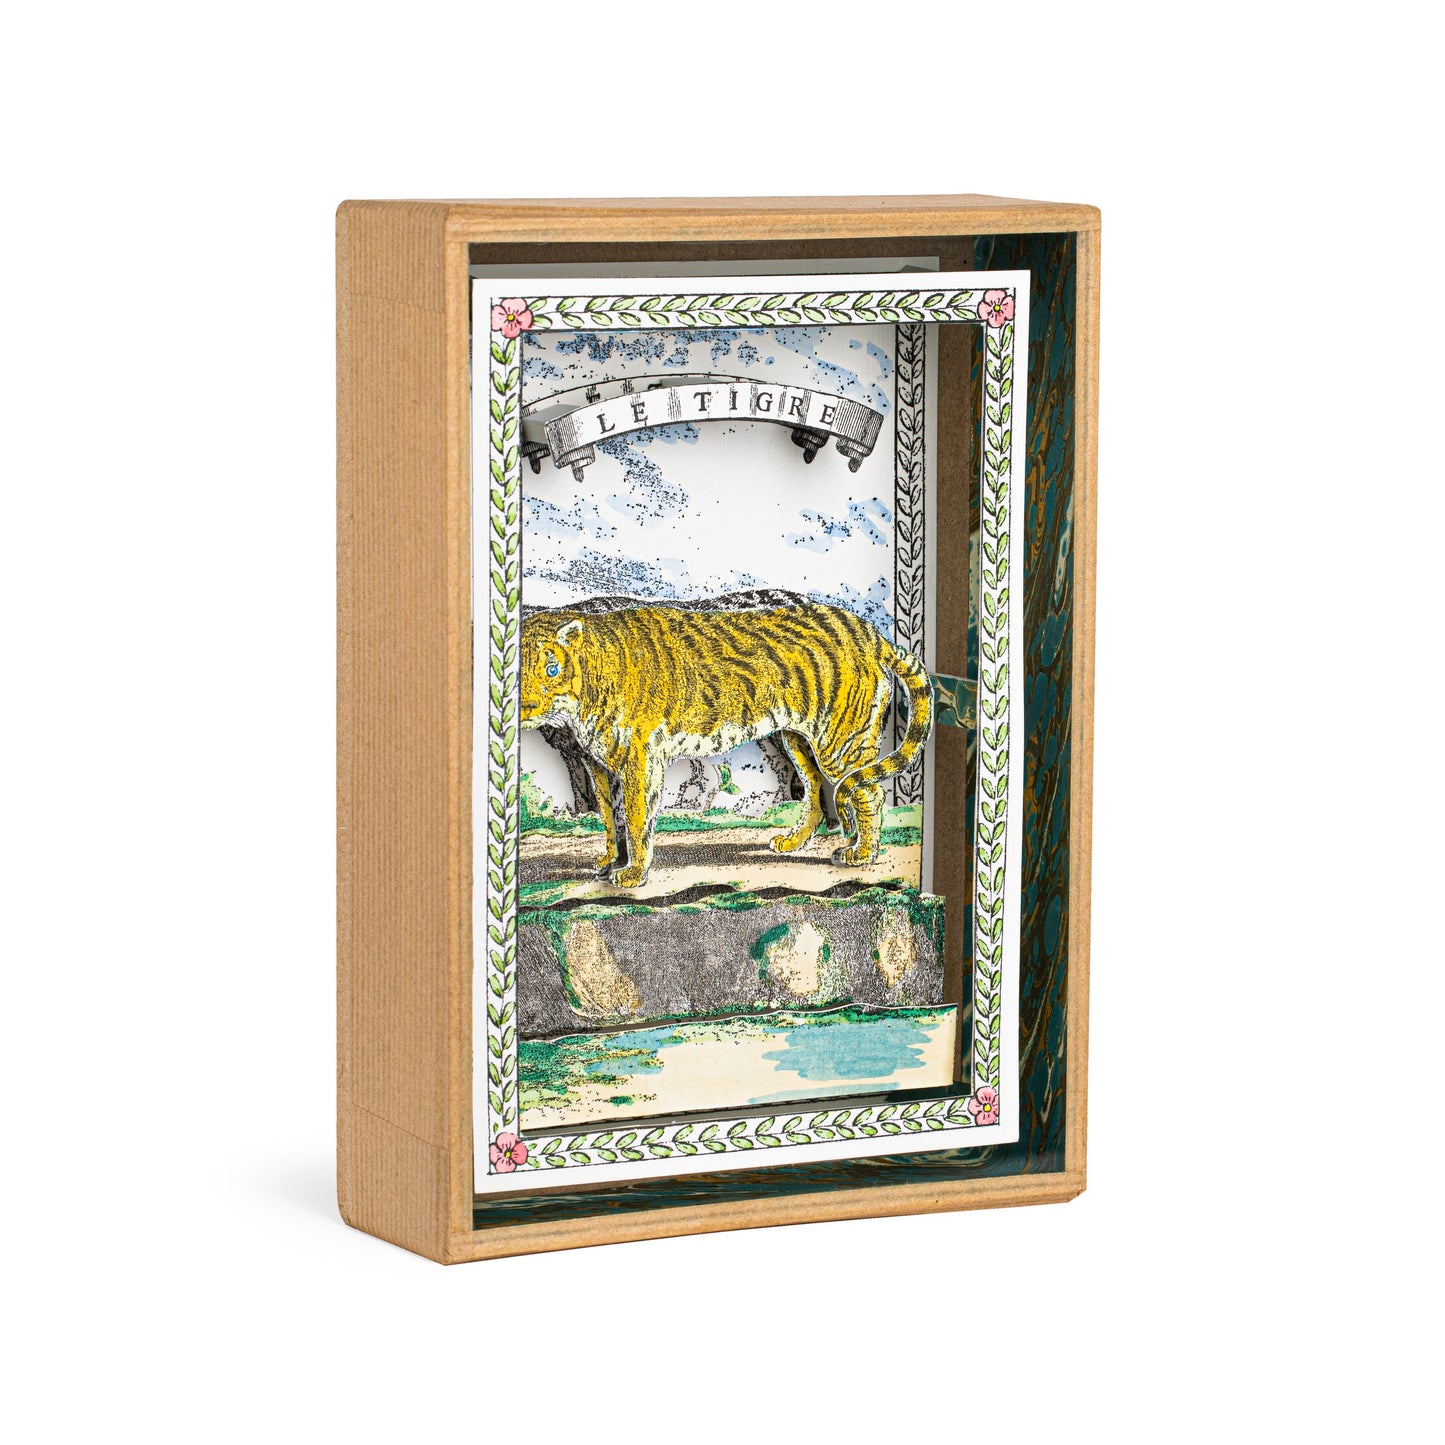 Showcase of Wonders | THE TIGER